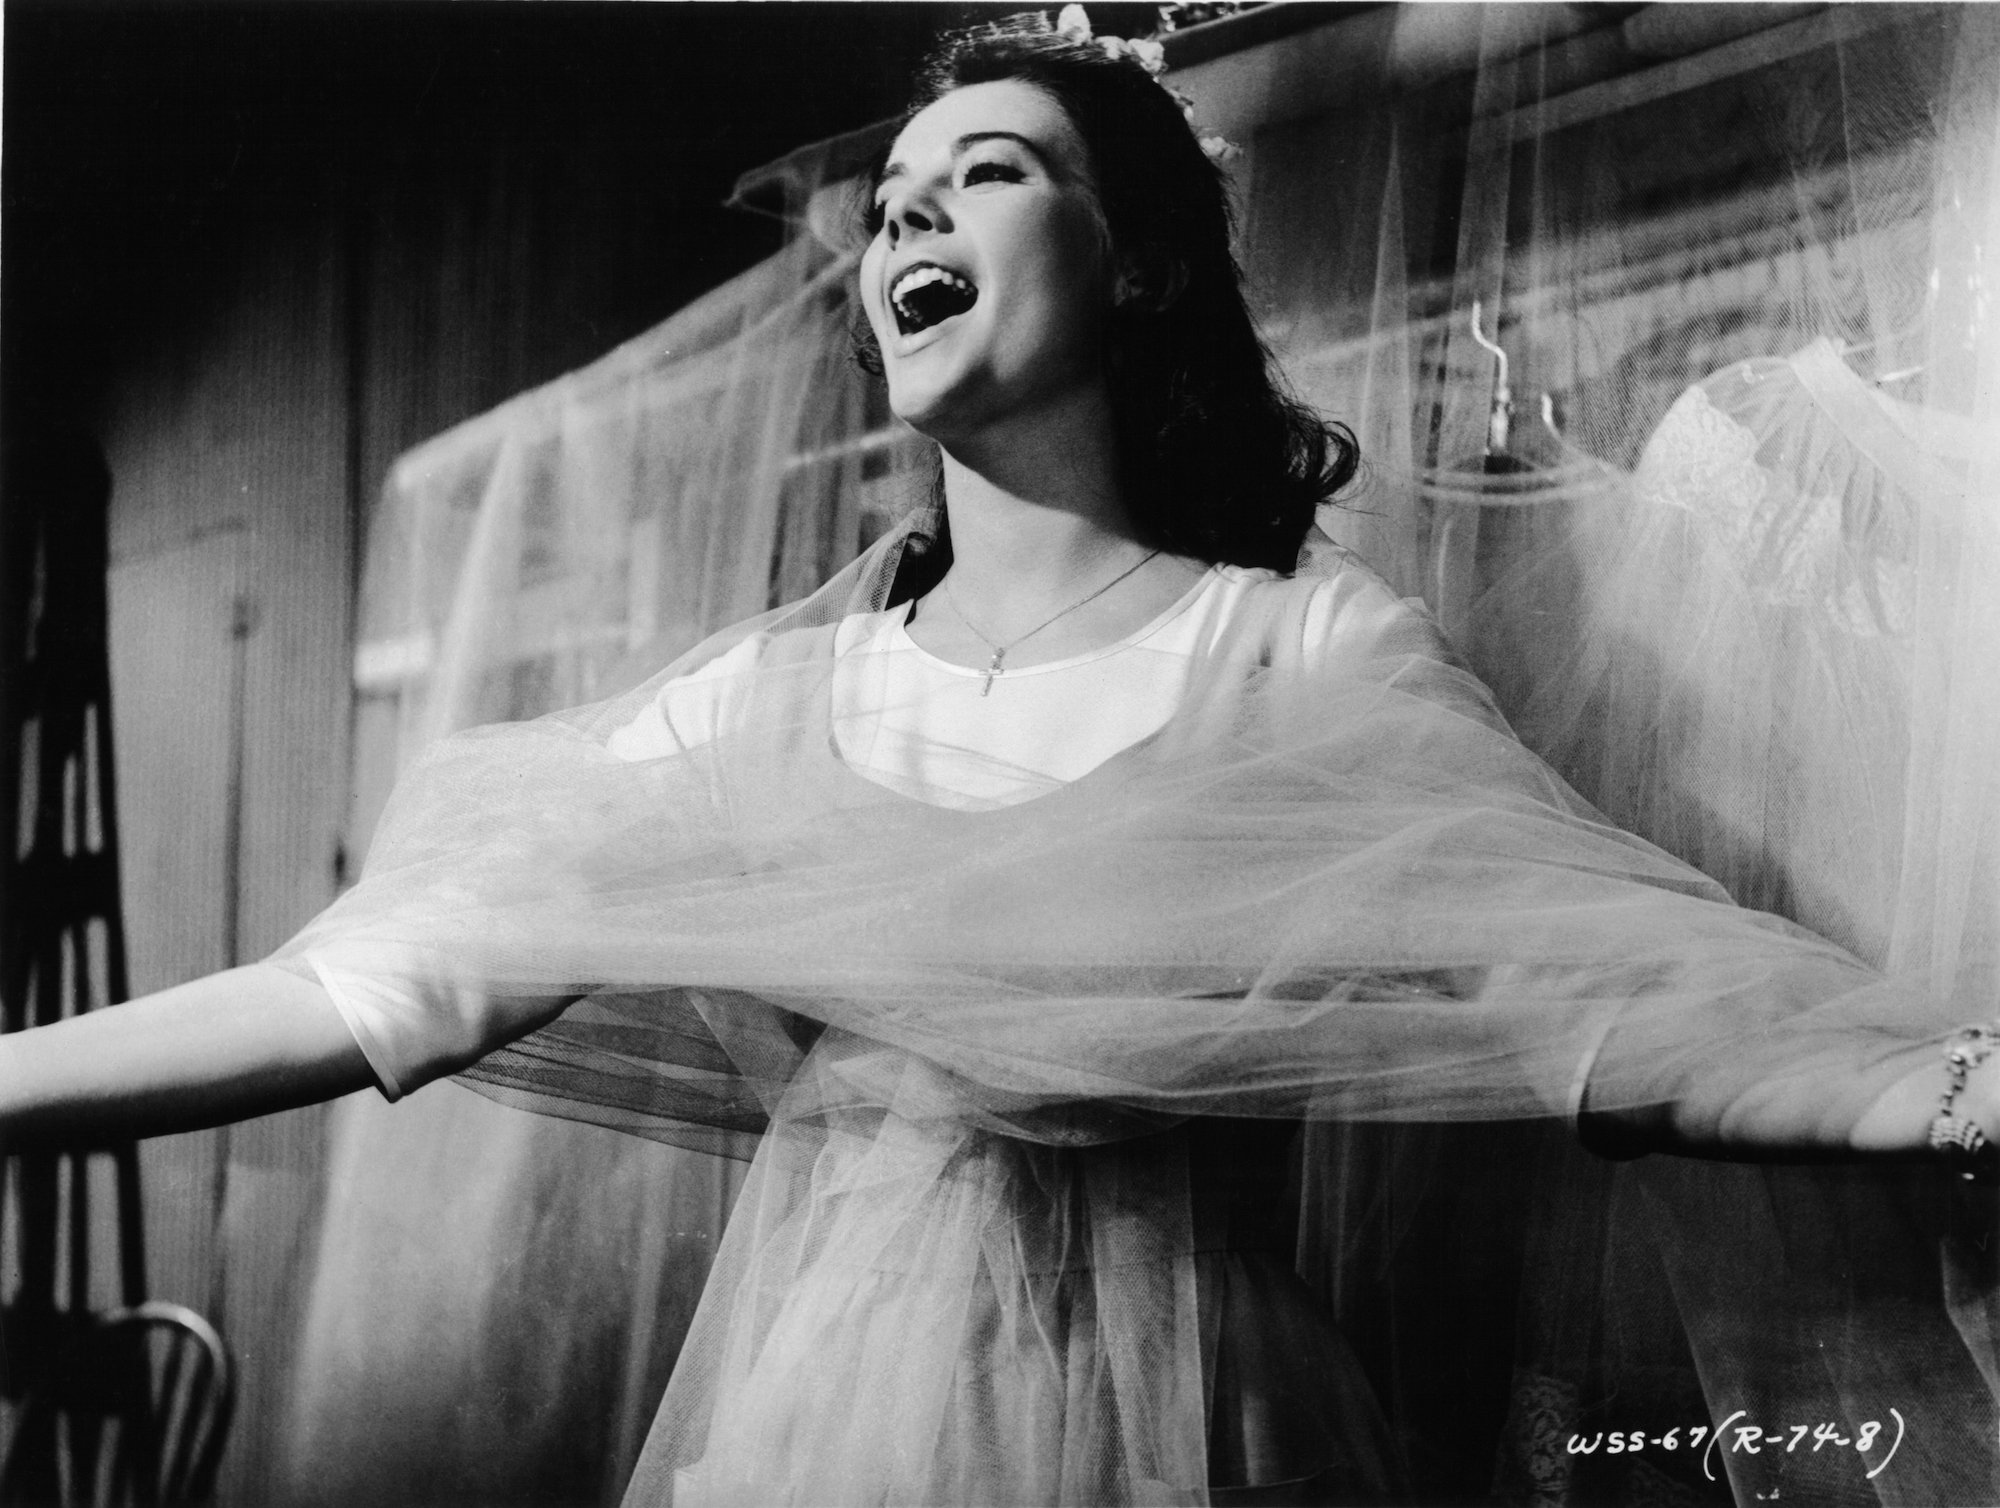 Natalie Wood wrapped in chiffon while singing in a scene from the film 'West Side Story'